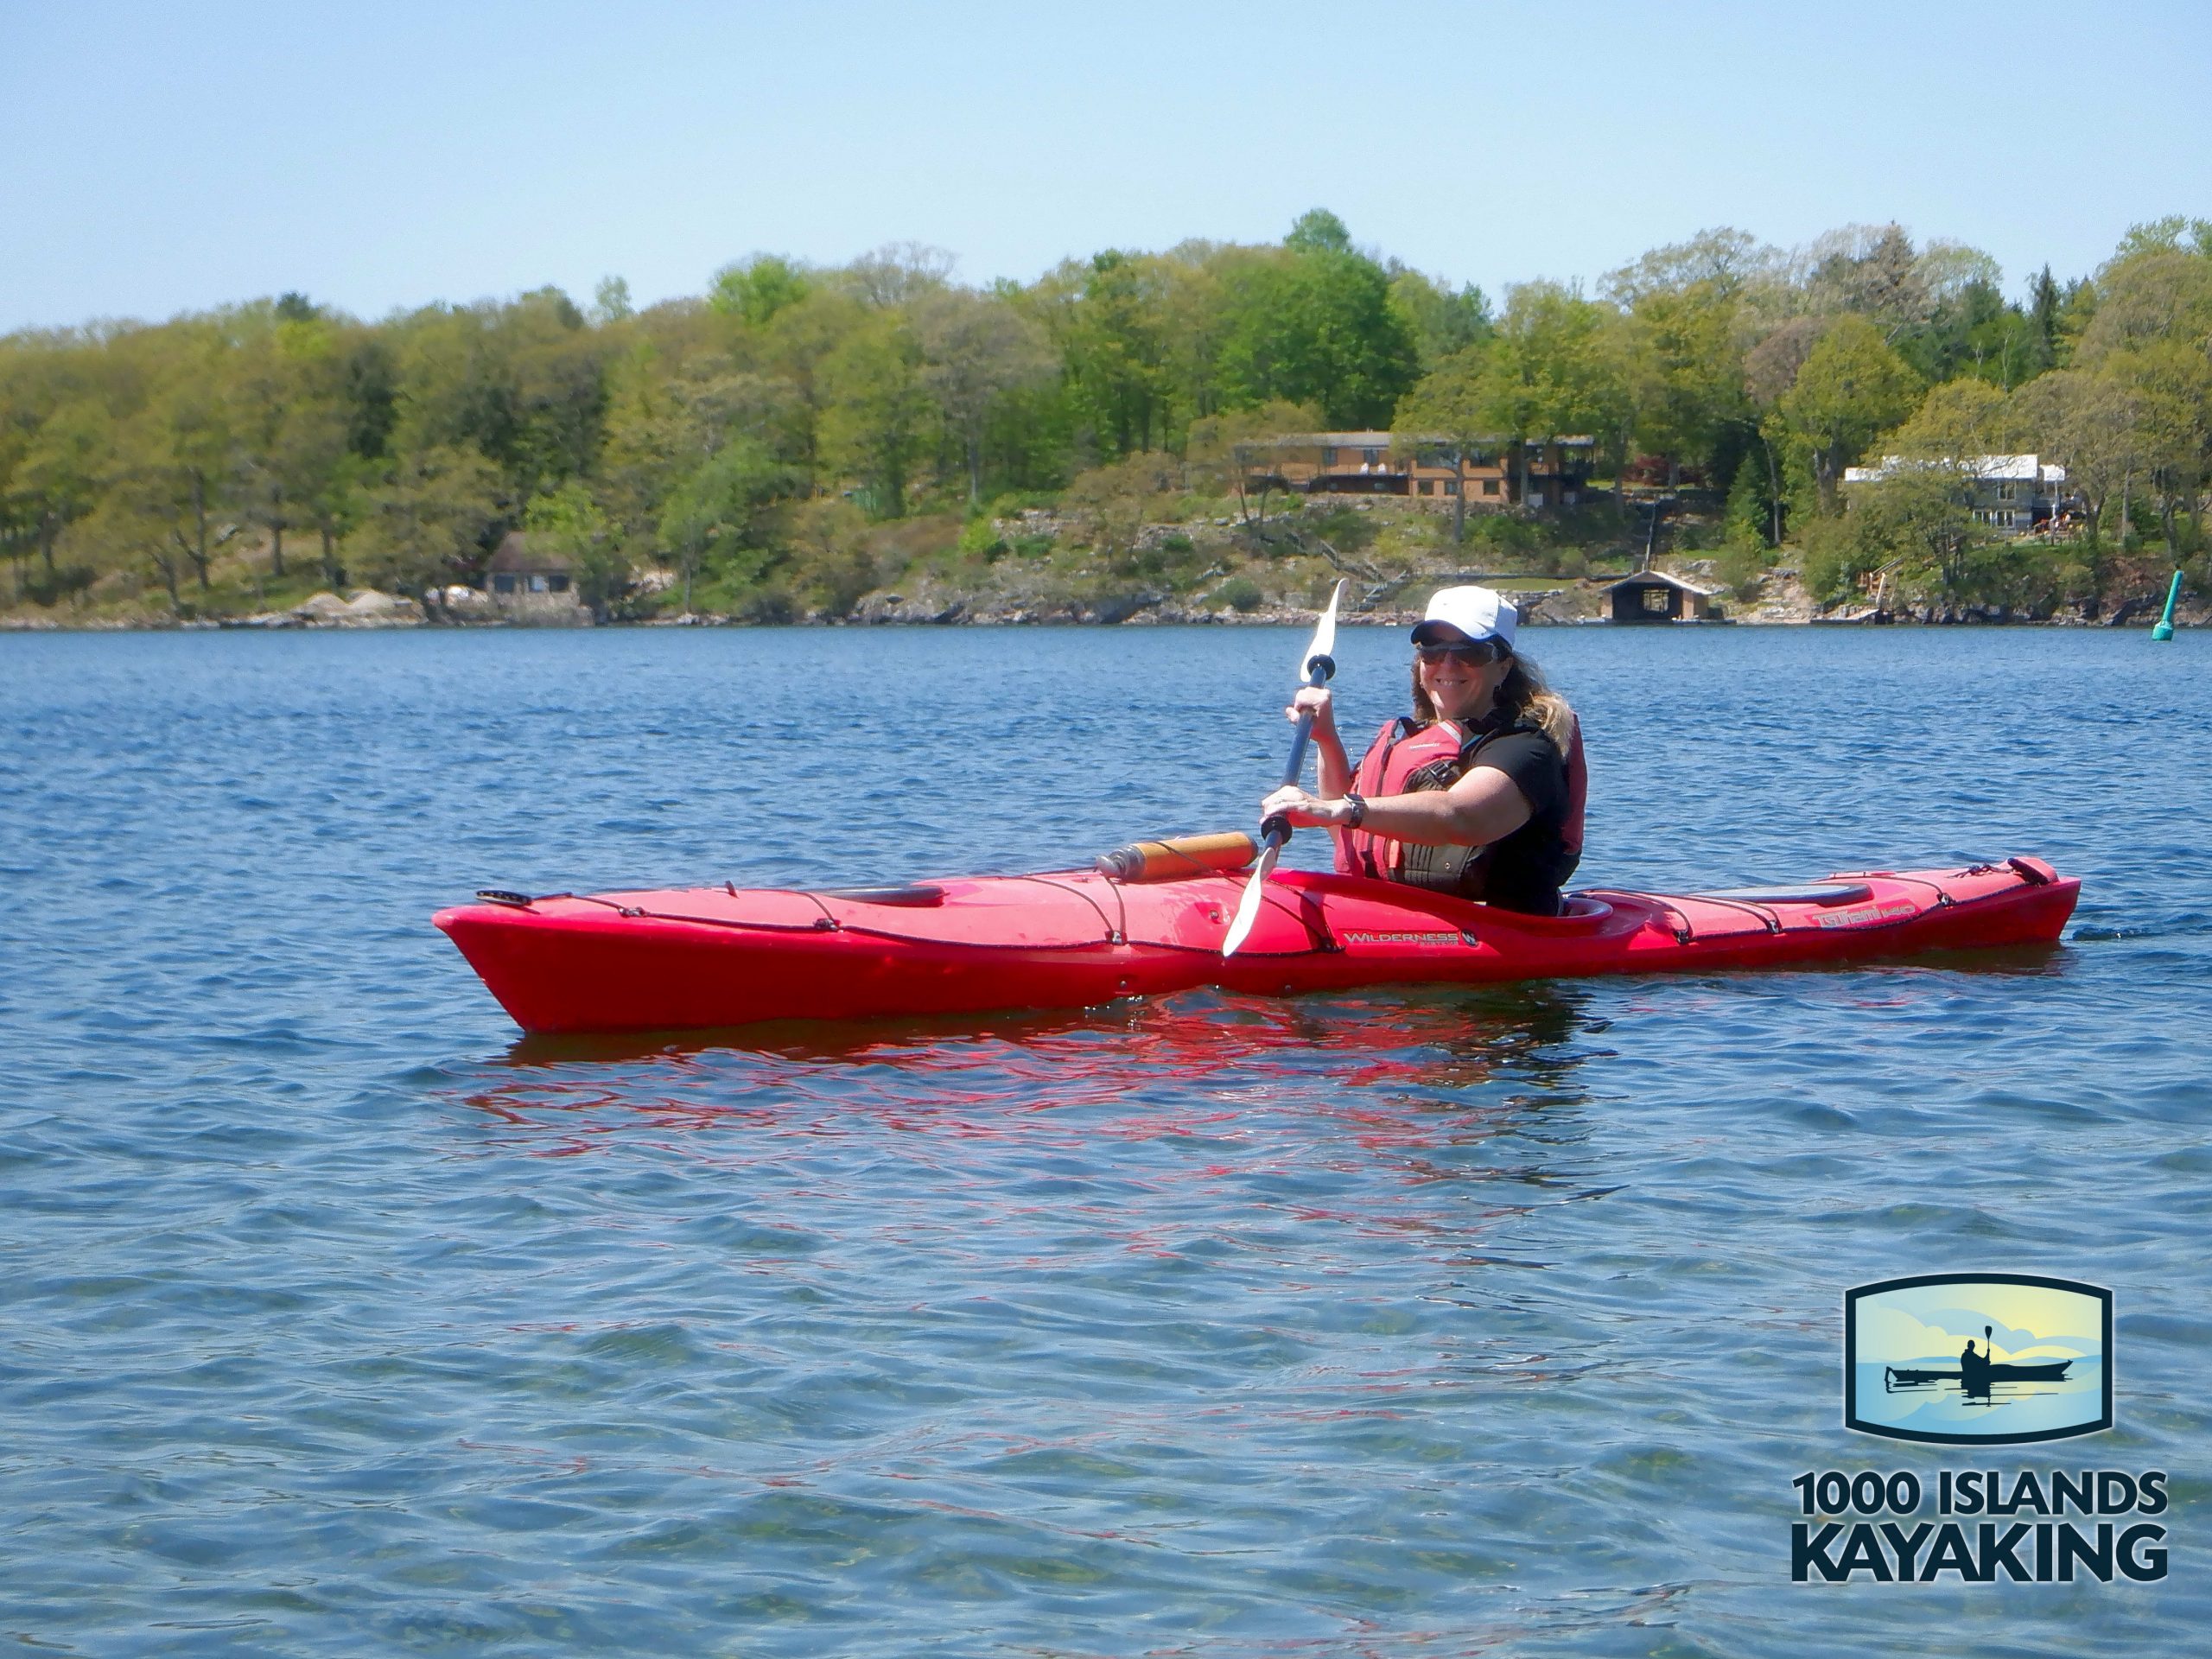 Shirley Musclow kayaking in the Thousand Islands of Ontario.